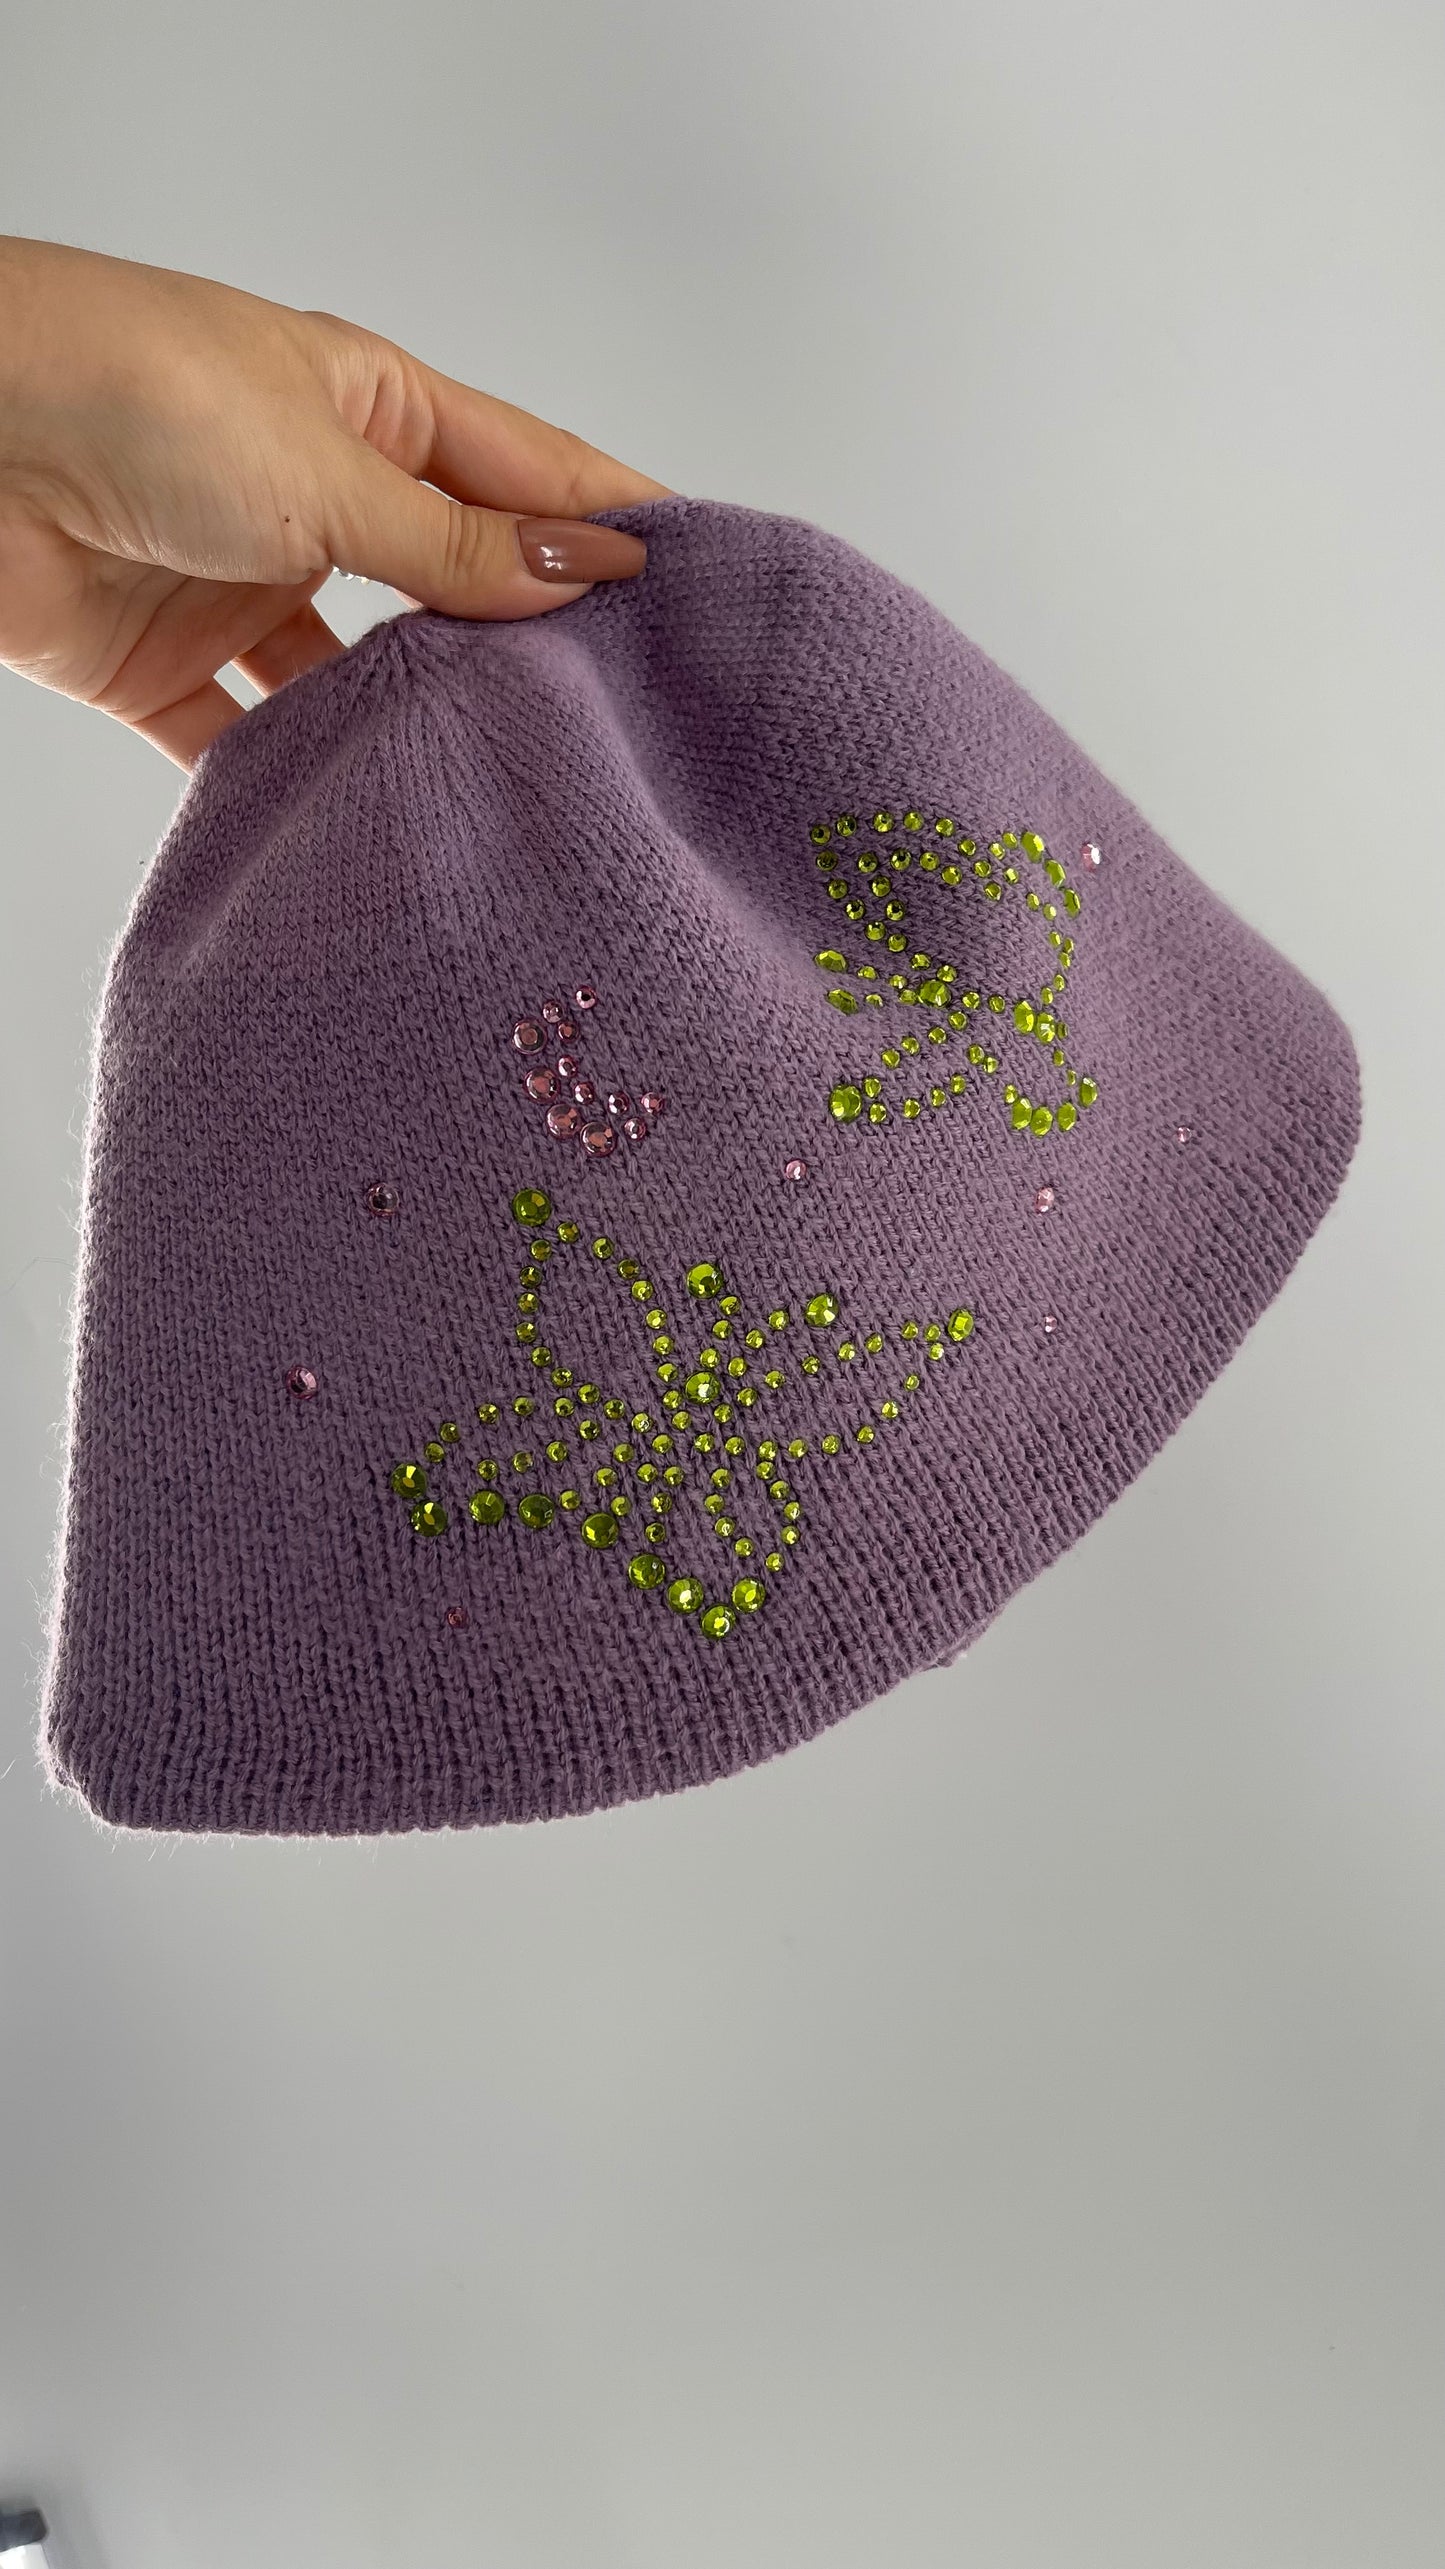 Urban Outfitters Lavender/Lilac Purple Knit Bucket Hat with Rhinestone Butterfly Details